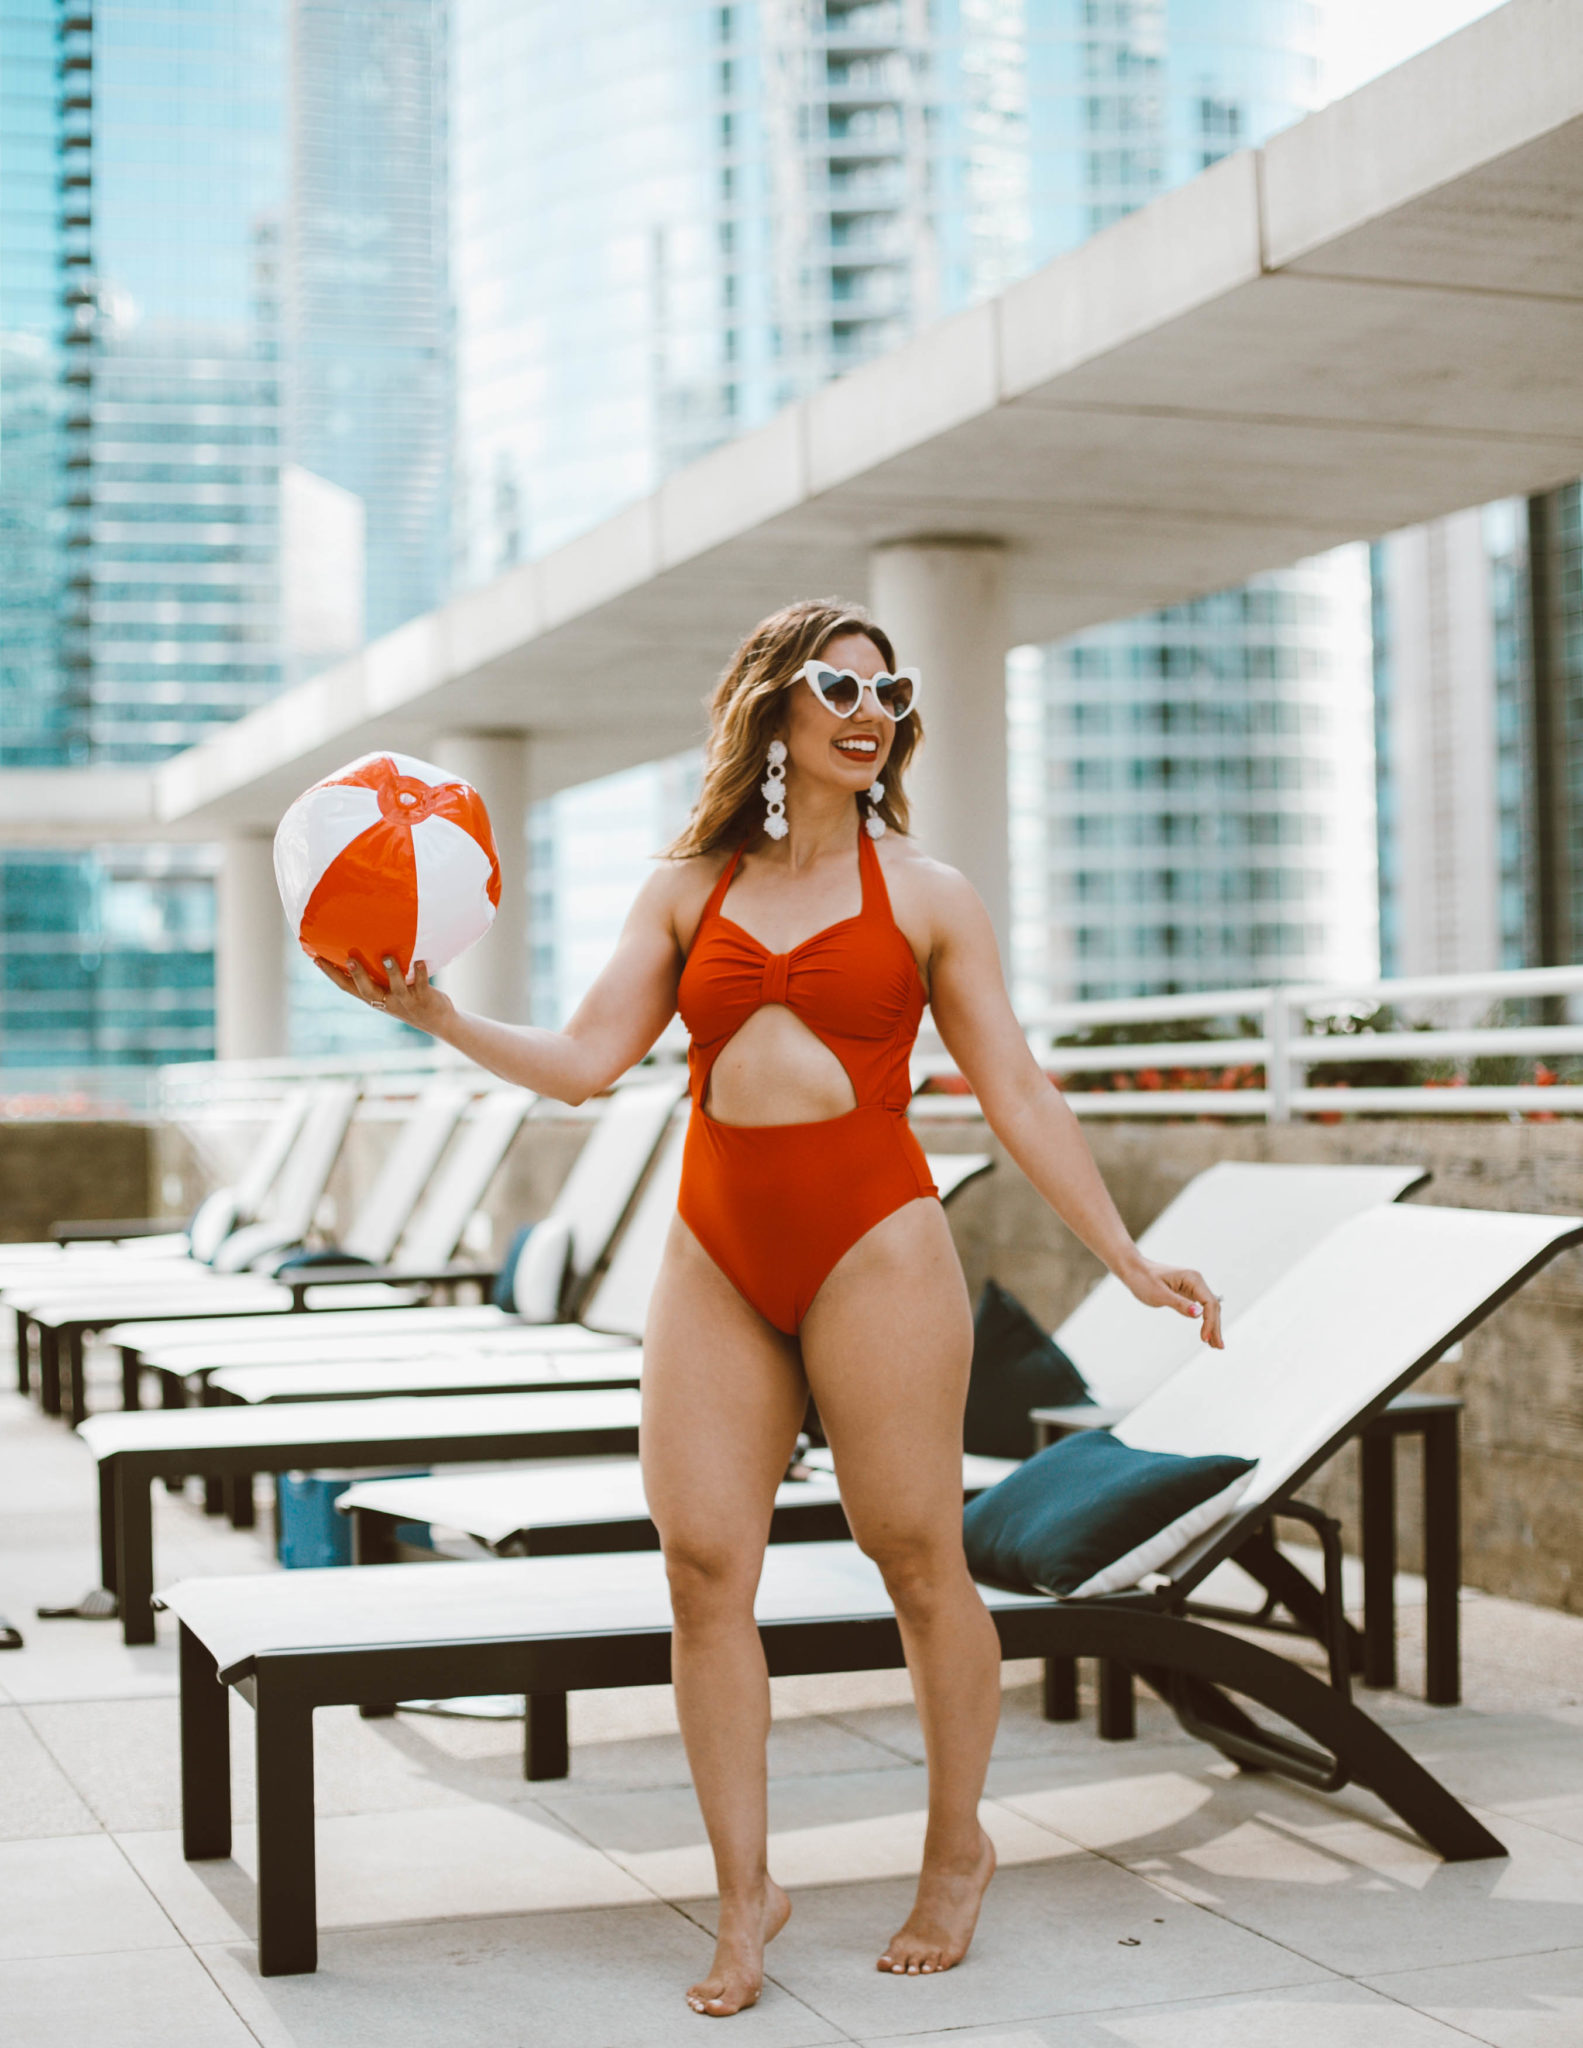 Life's a Beach: Red Swimsuit - Introducing The Magnificent 8 featured by popular Chicago fashion blogger Glass of Glam